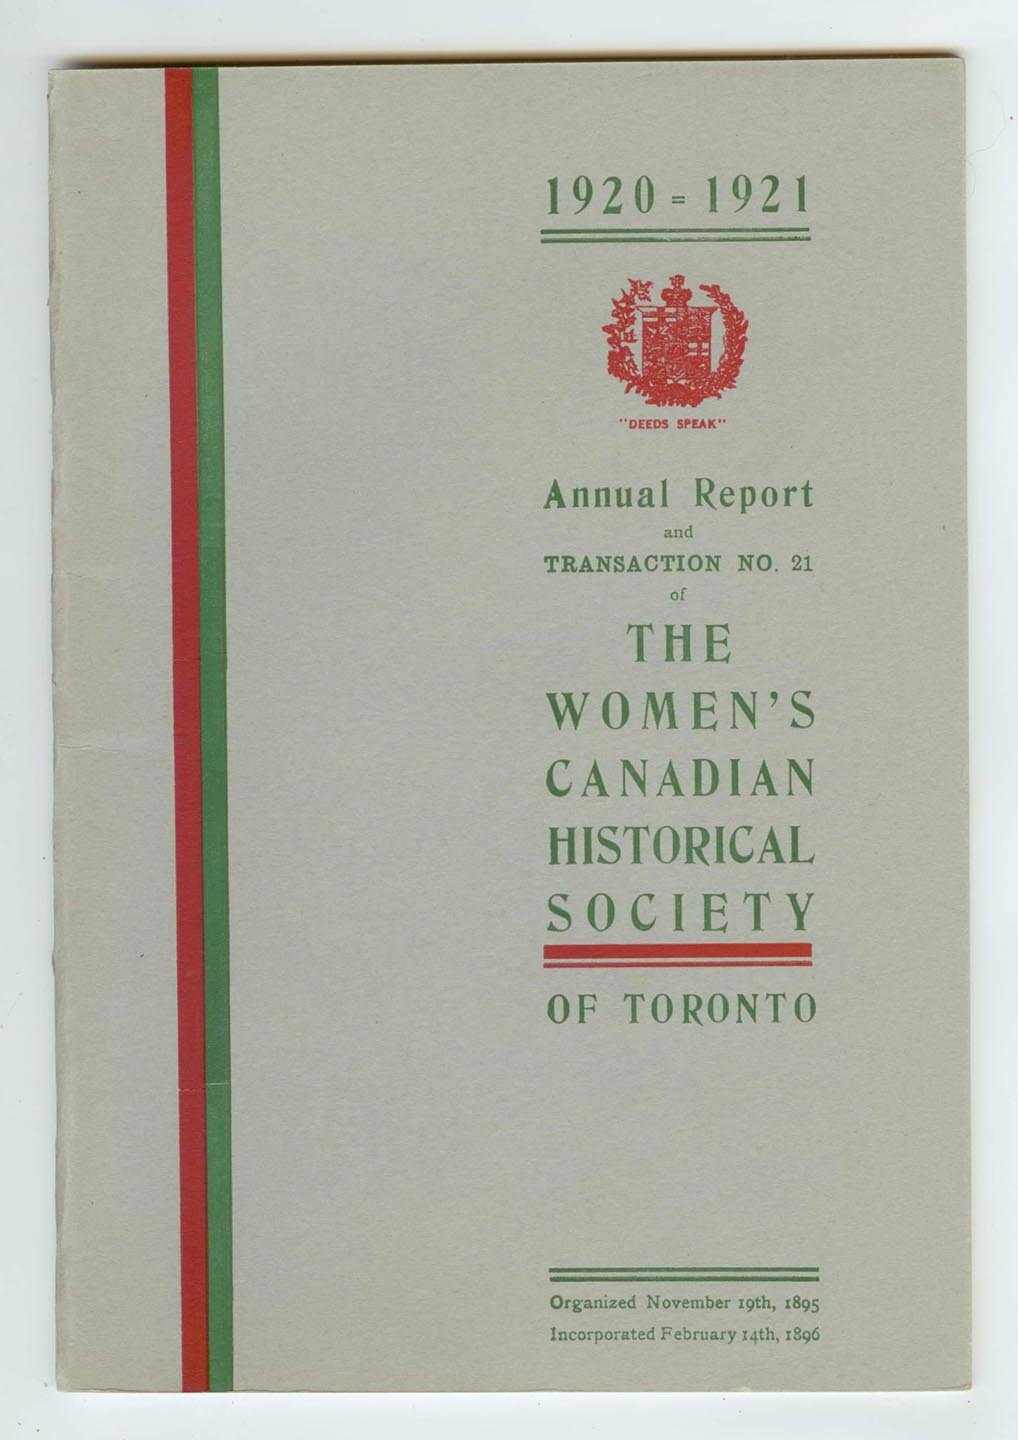 Annual Report and Transaction No. 21 of The Women's Canadian Historical Society of Toronto, 1920-1921